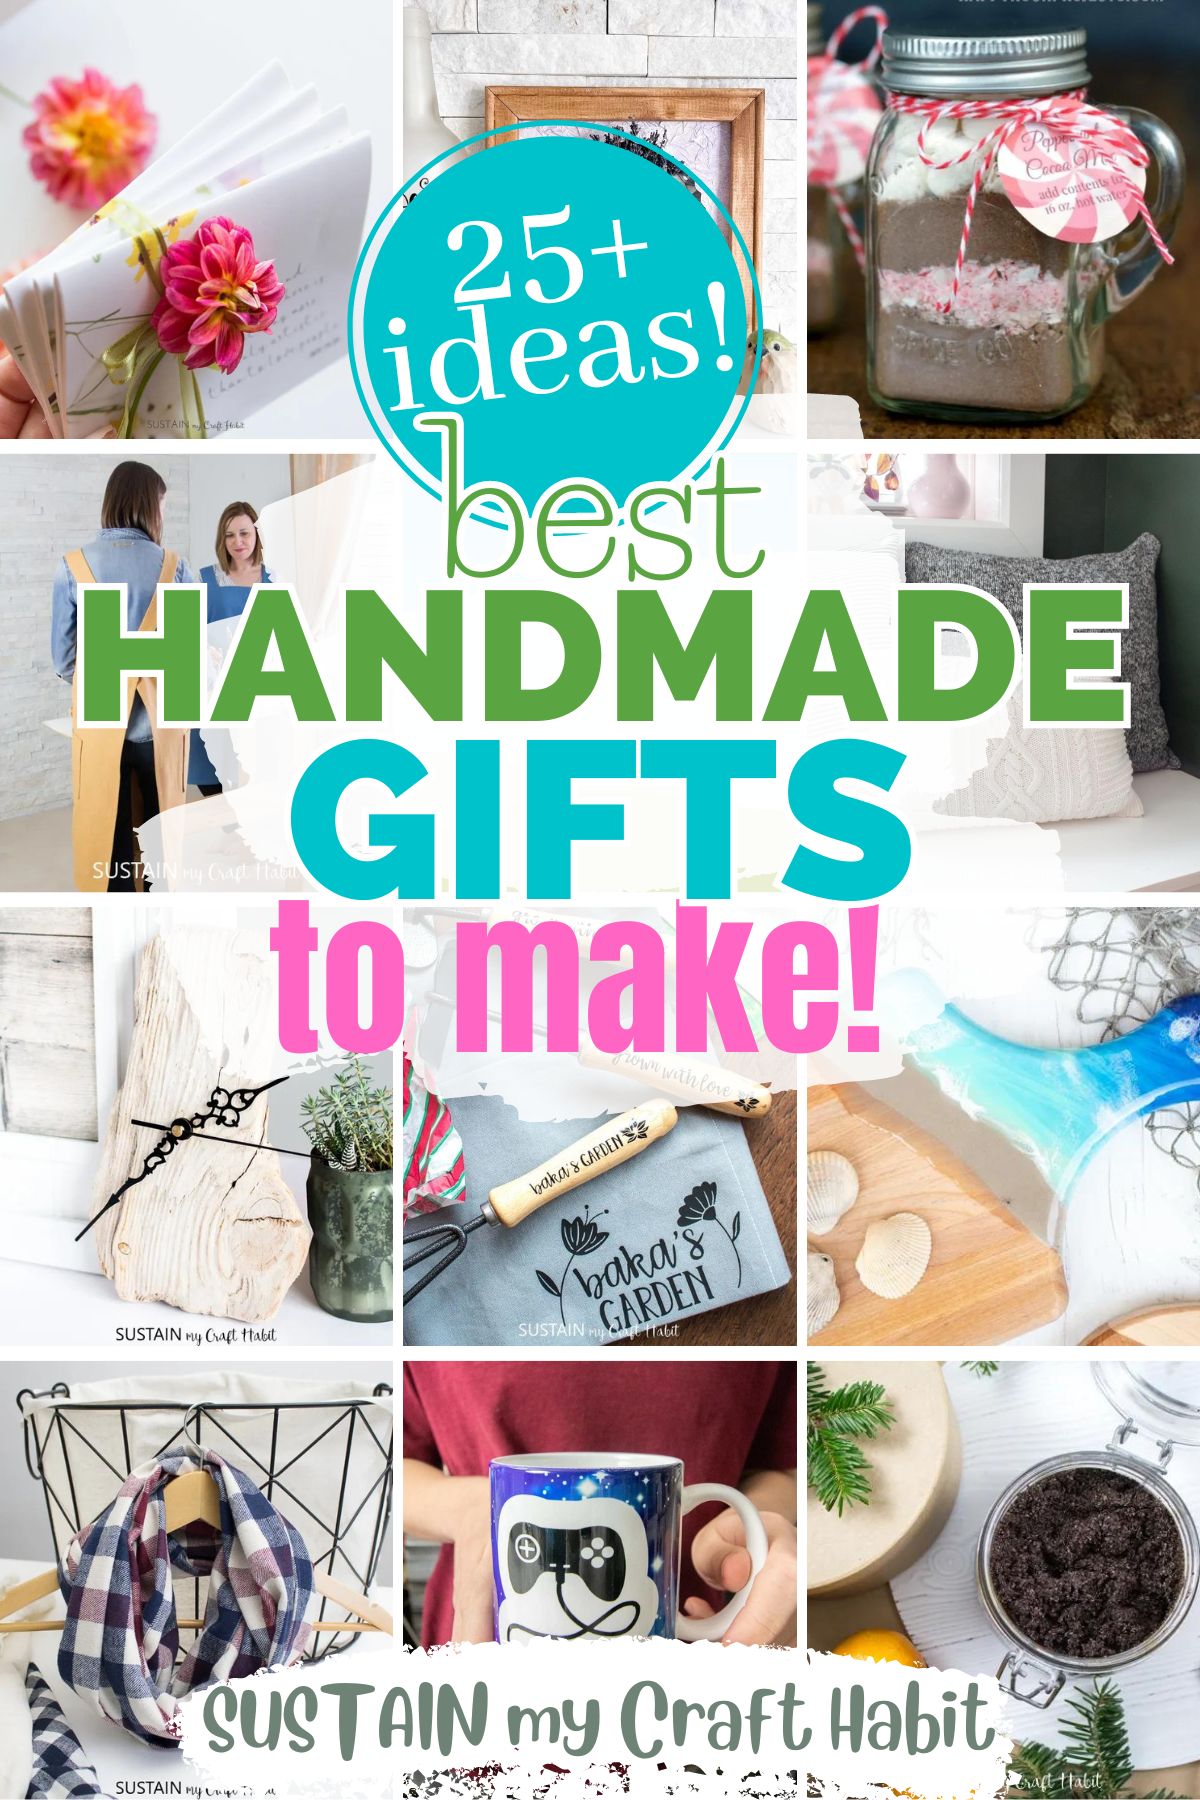 Collage of images showing examples of handmade gift ideas.